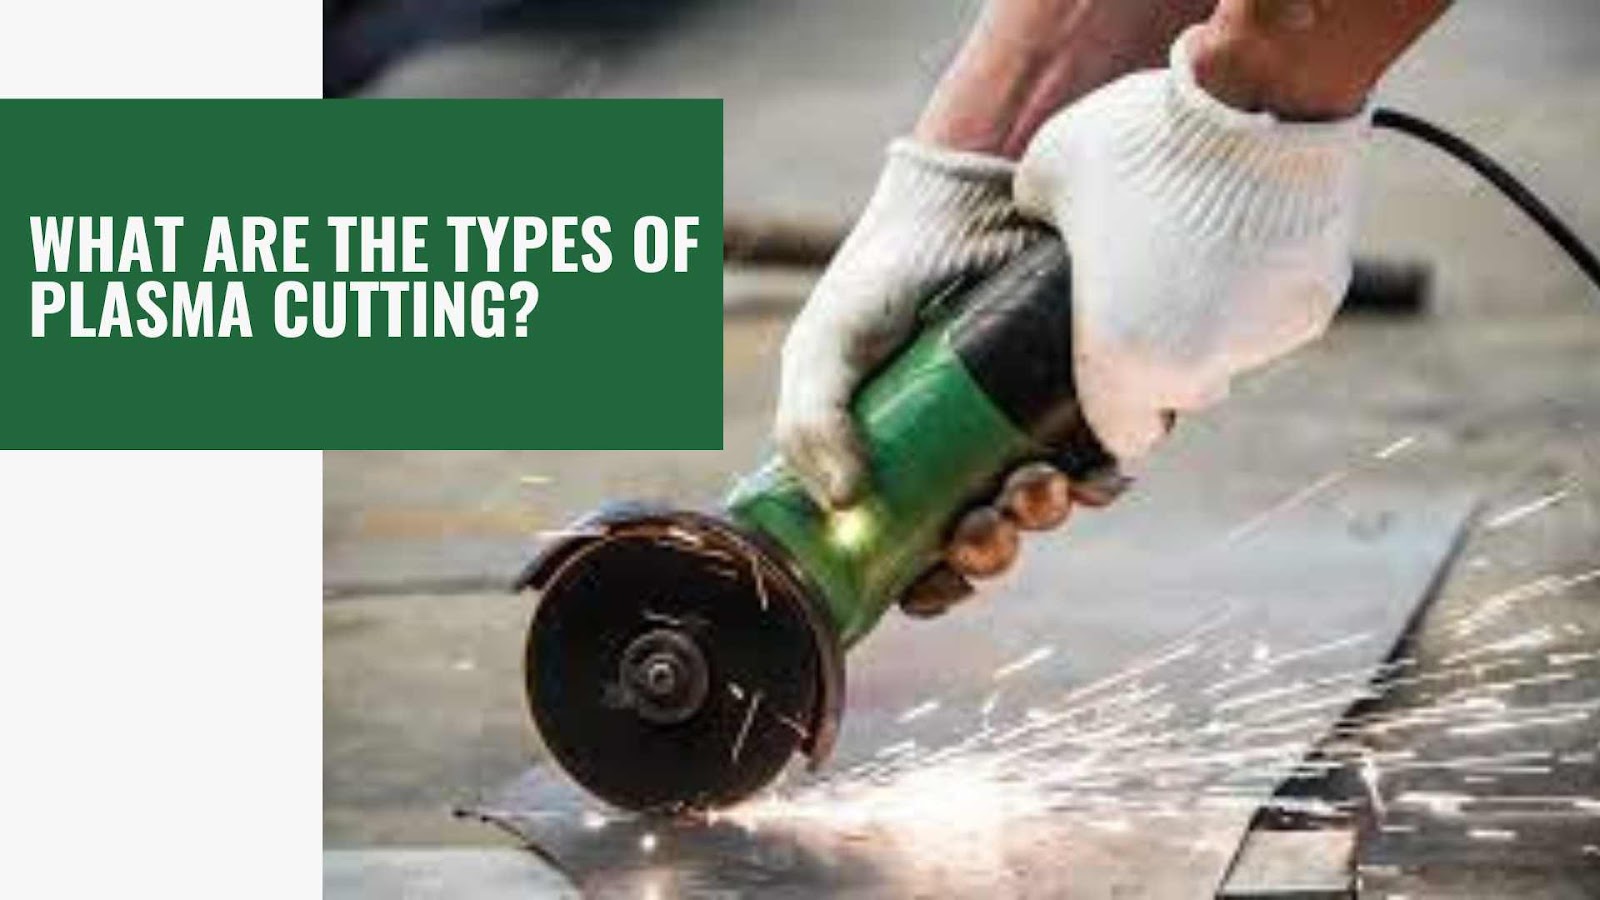 What are the Types of Plasma Cutting?